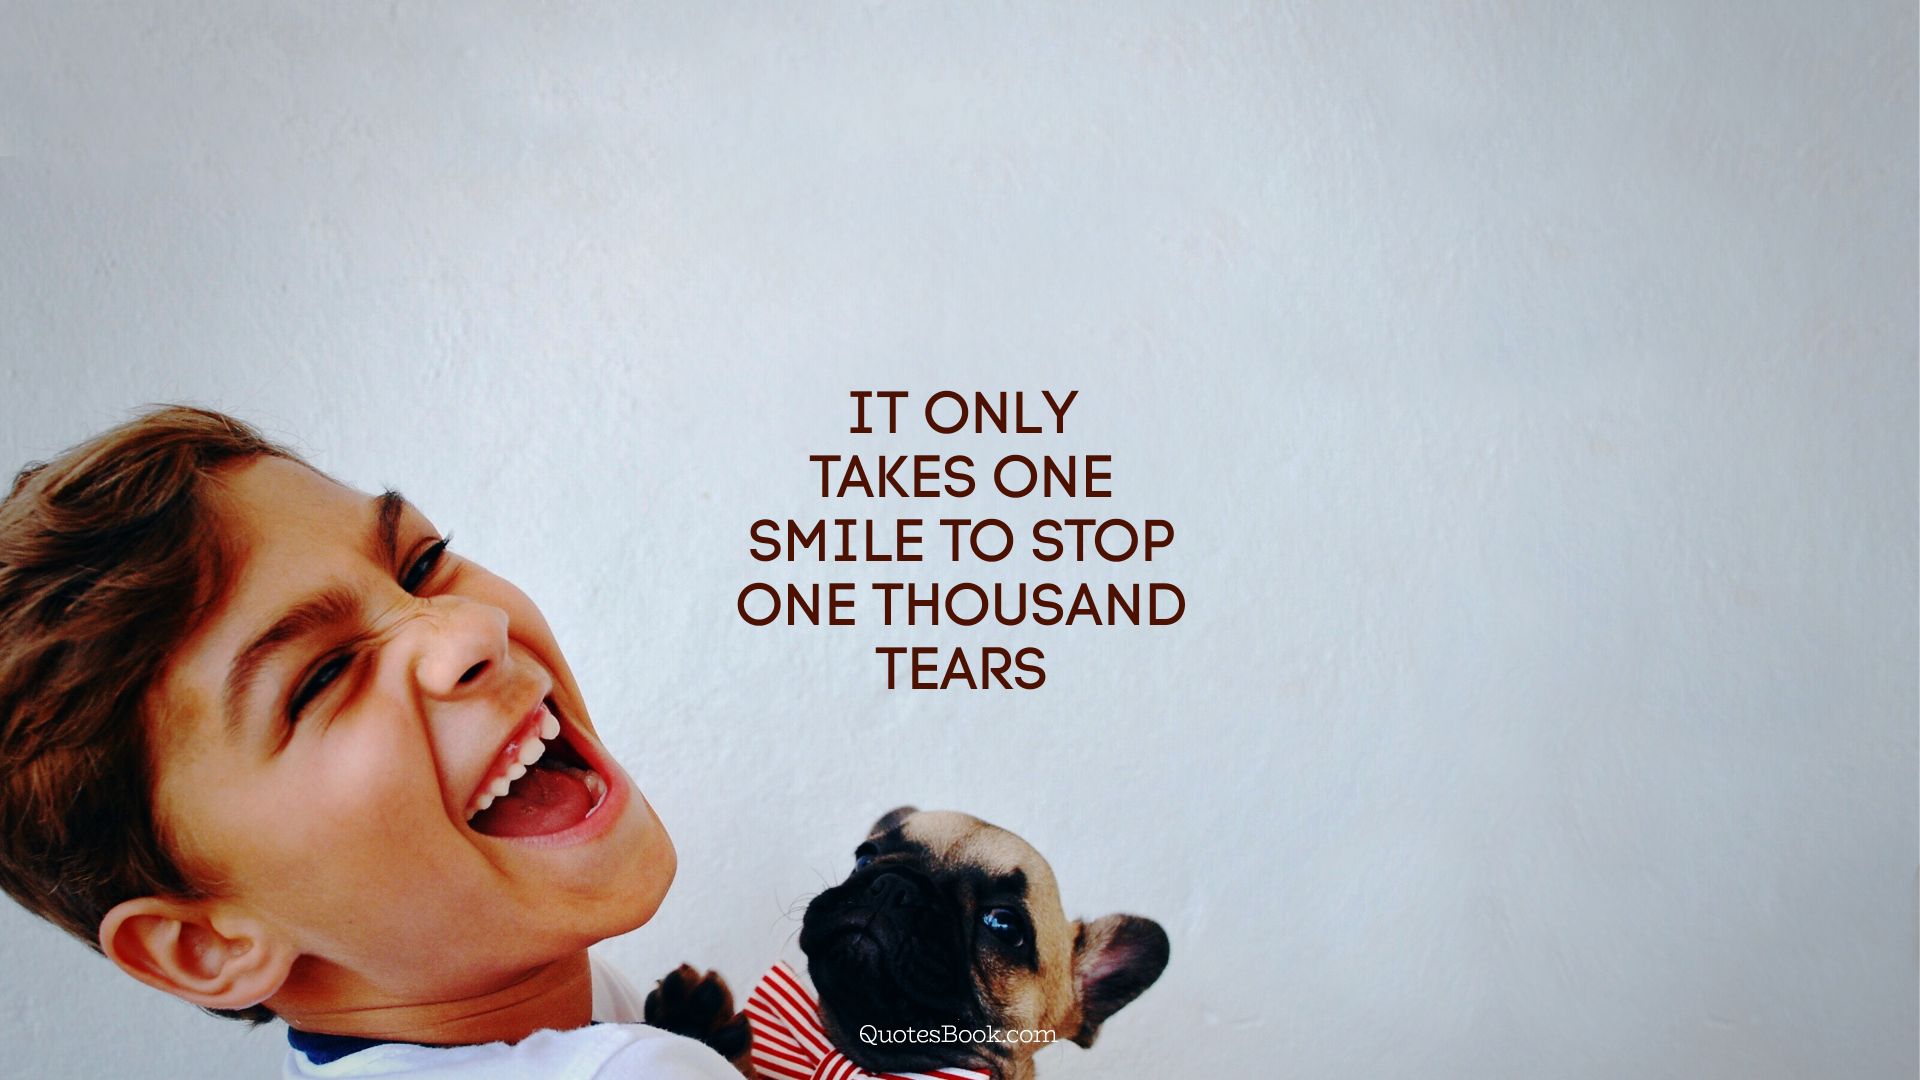 It only takes one smile to stop one thousand tears